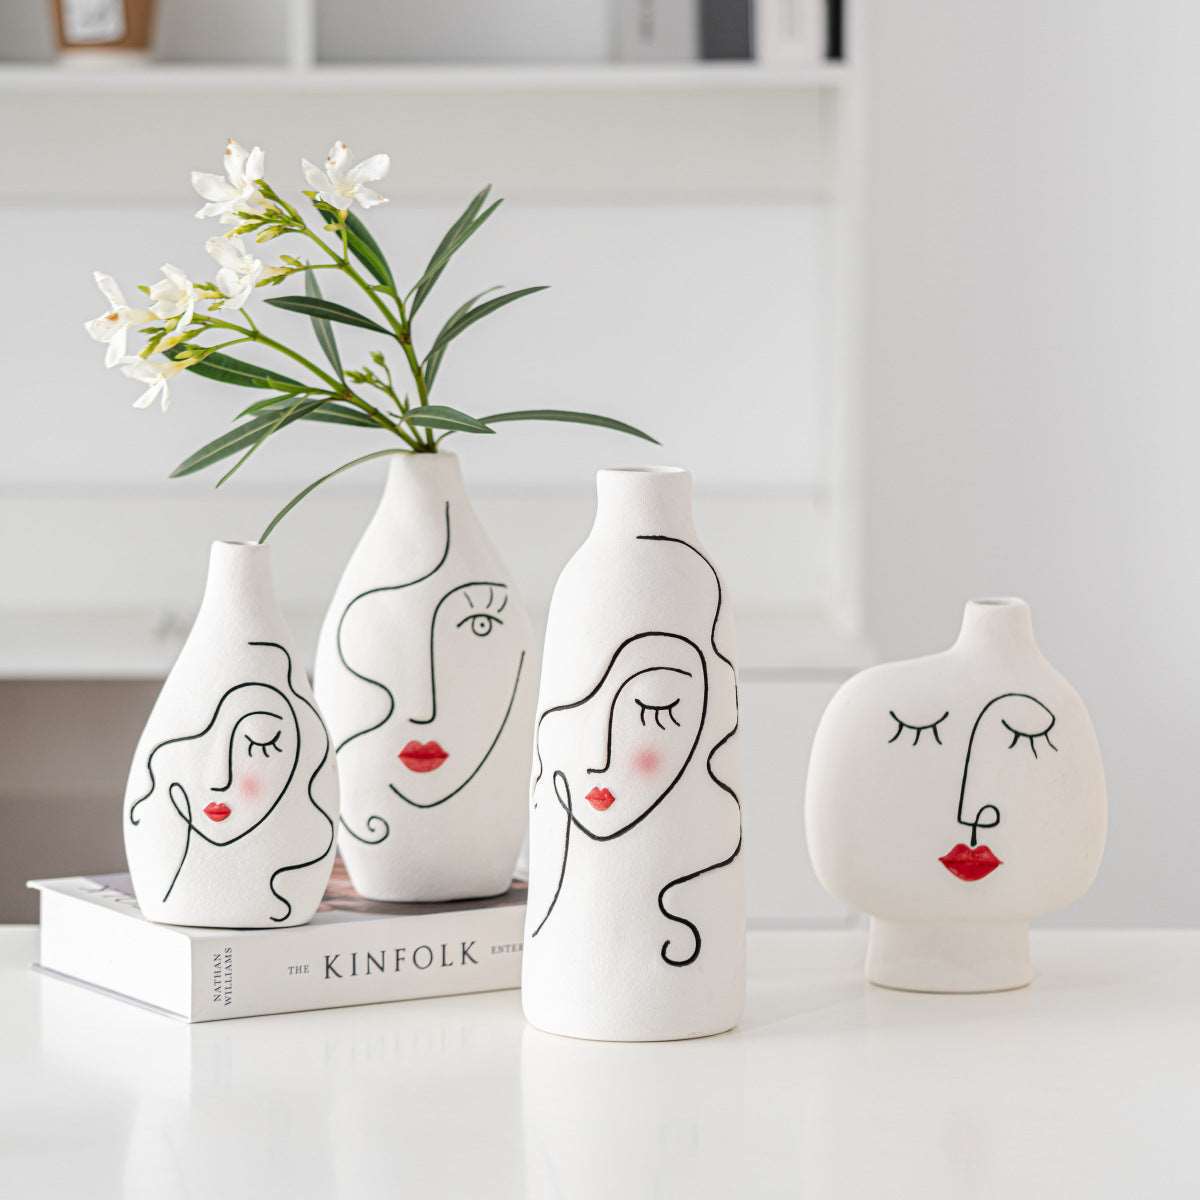 Abstract Face Hand-painted Ceramic Vase